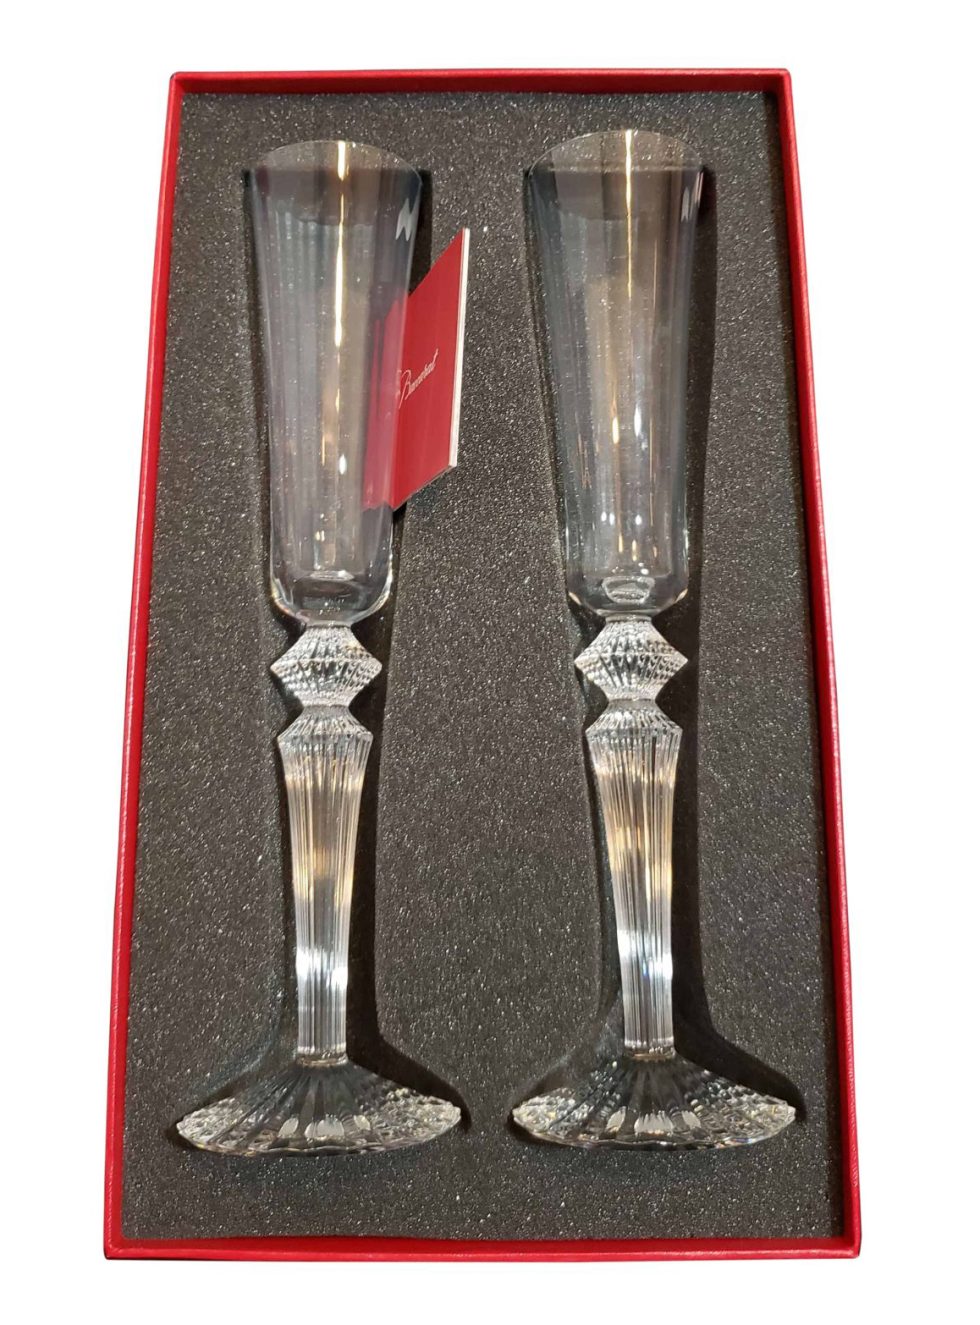 baccarat mille nuits flutissimo champagne flutes signed by mathias